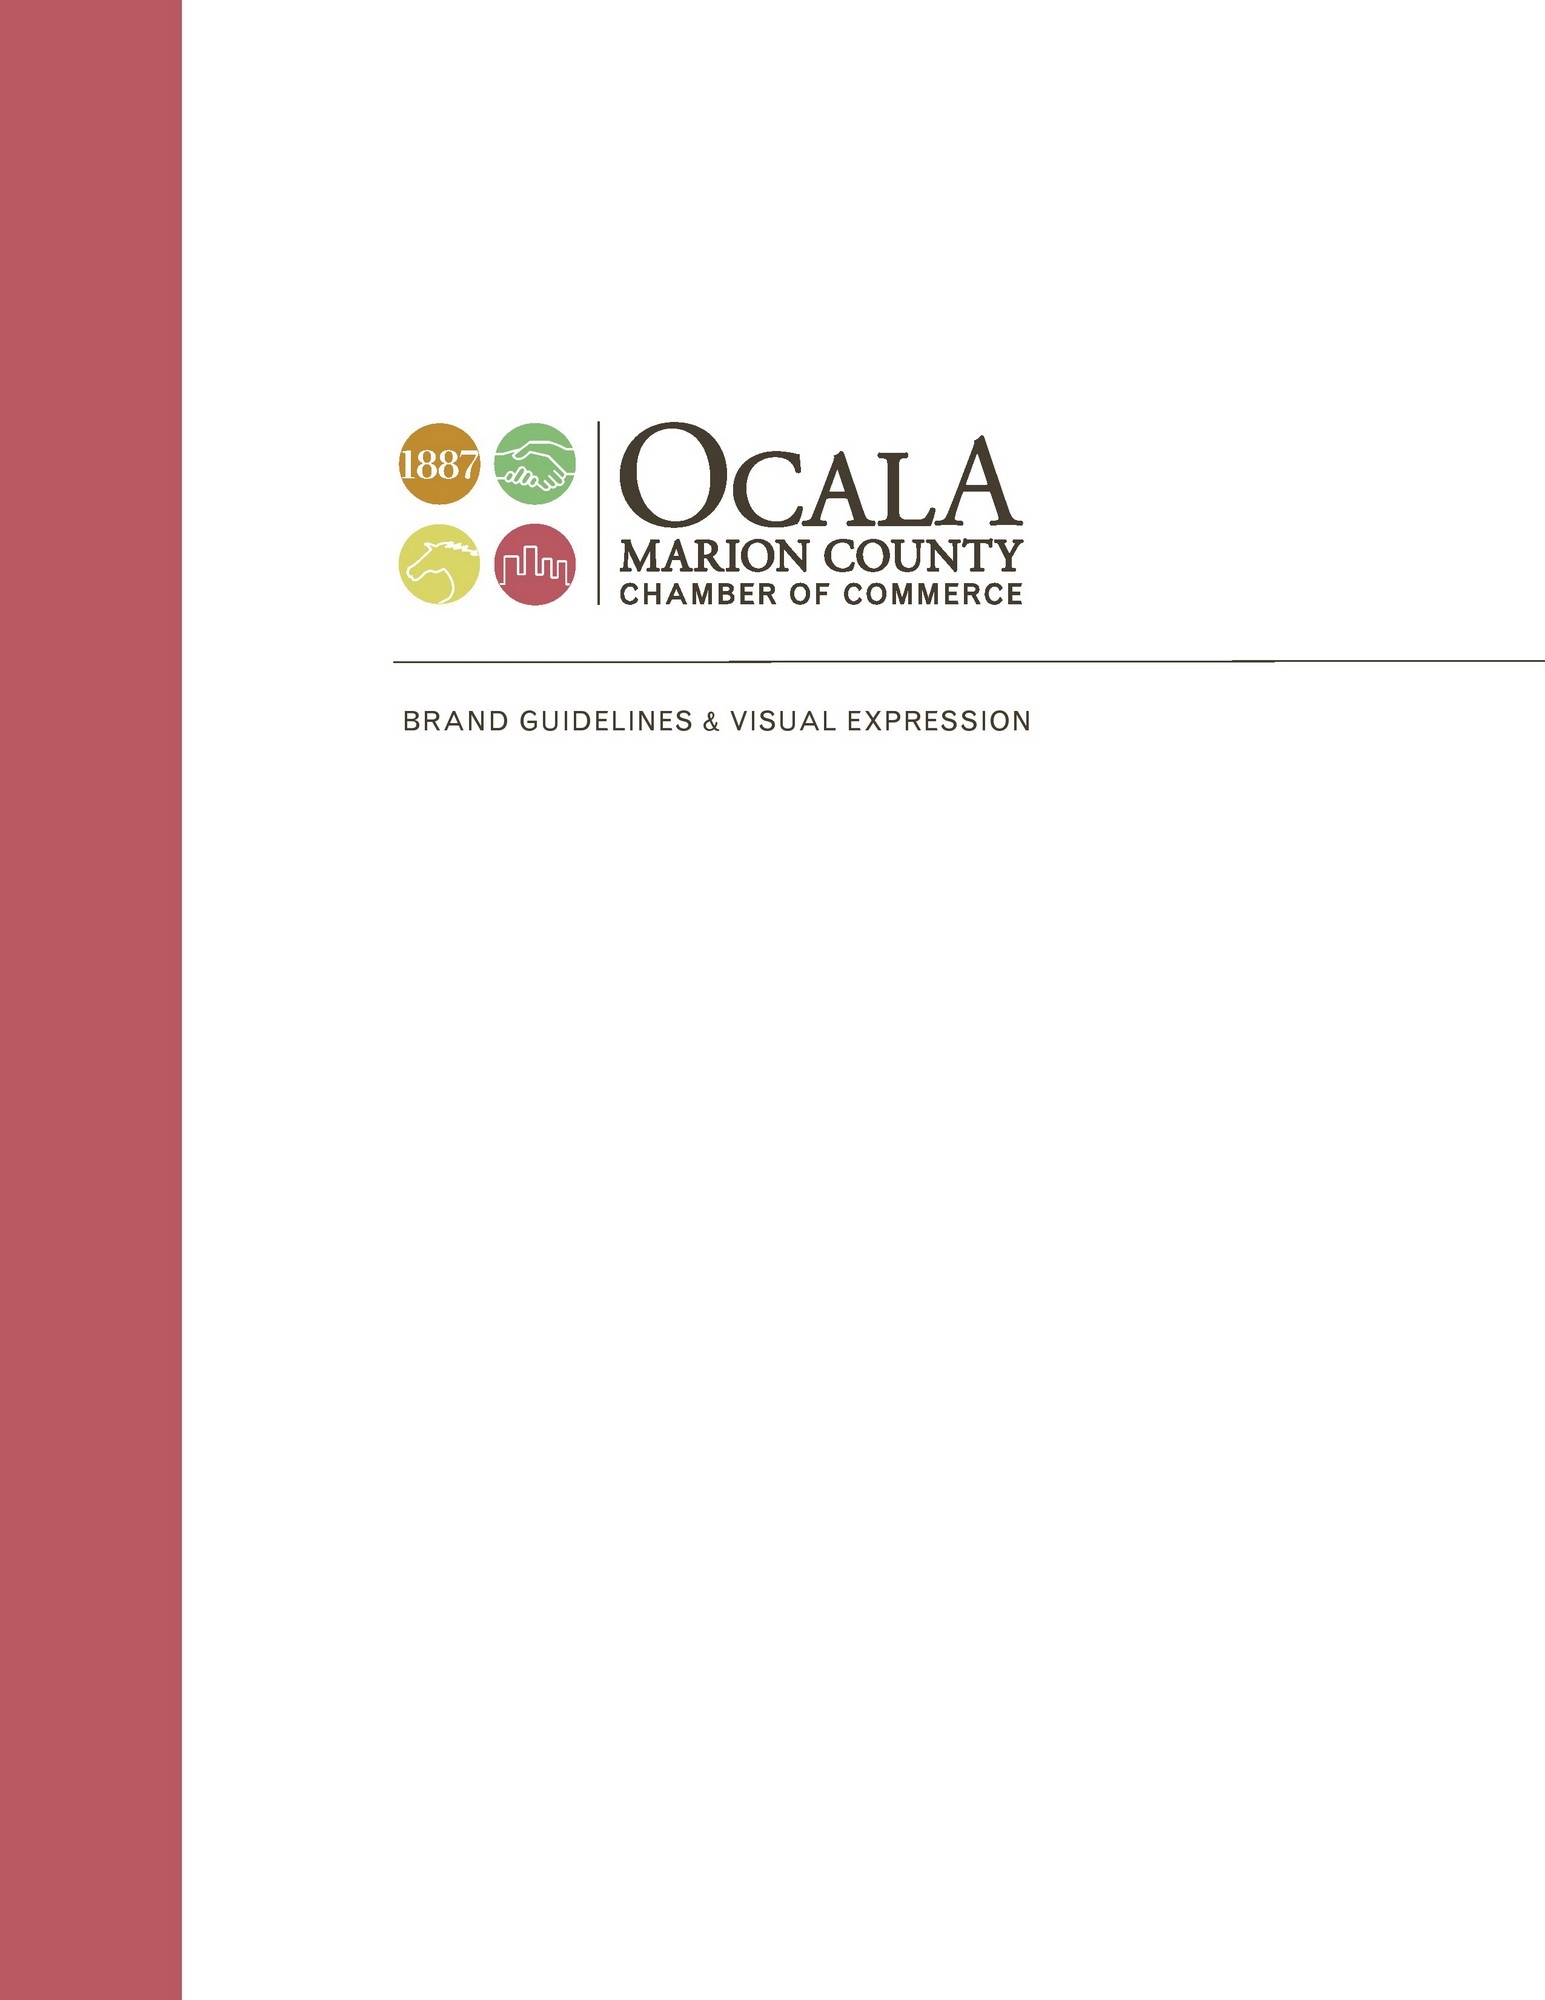 Ocala Marion County Chamber of Commerce Brand Guidelines and Visual Expression